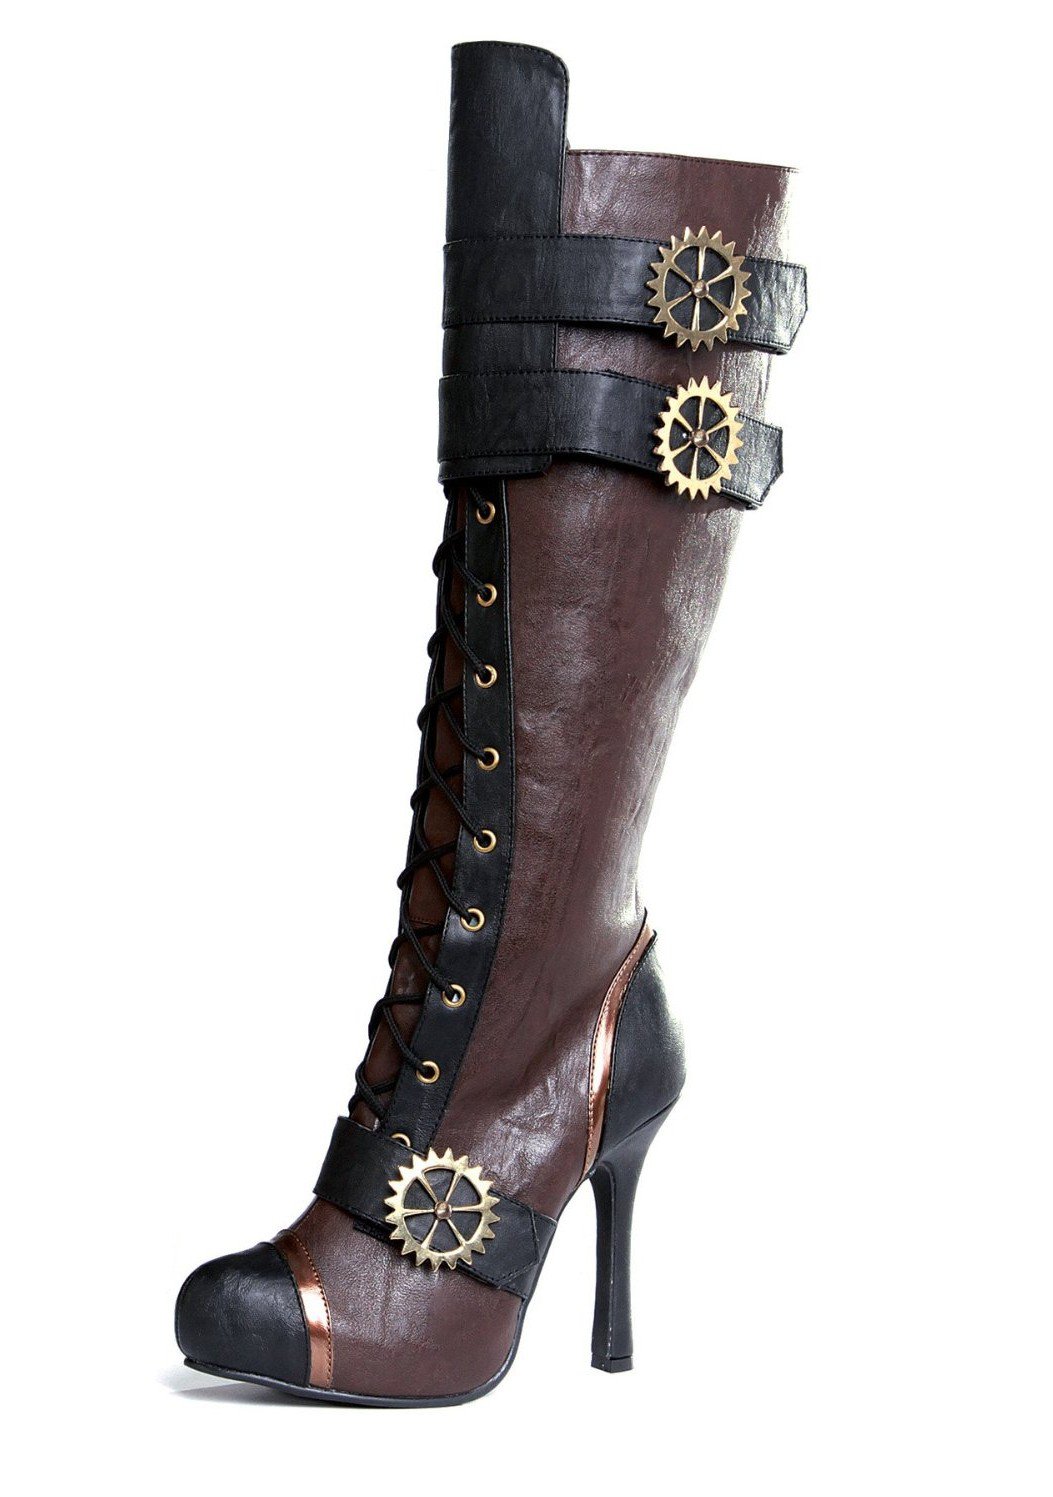 420-QUINLEY 4" Knee High Steampunk Boot With Laces